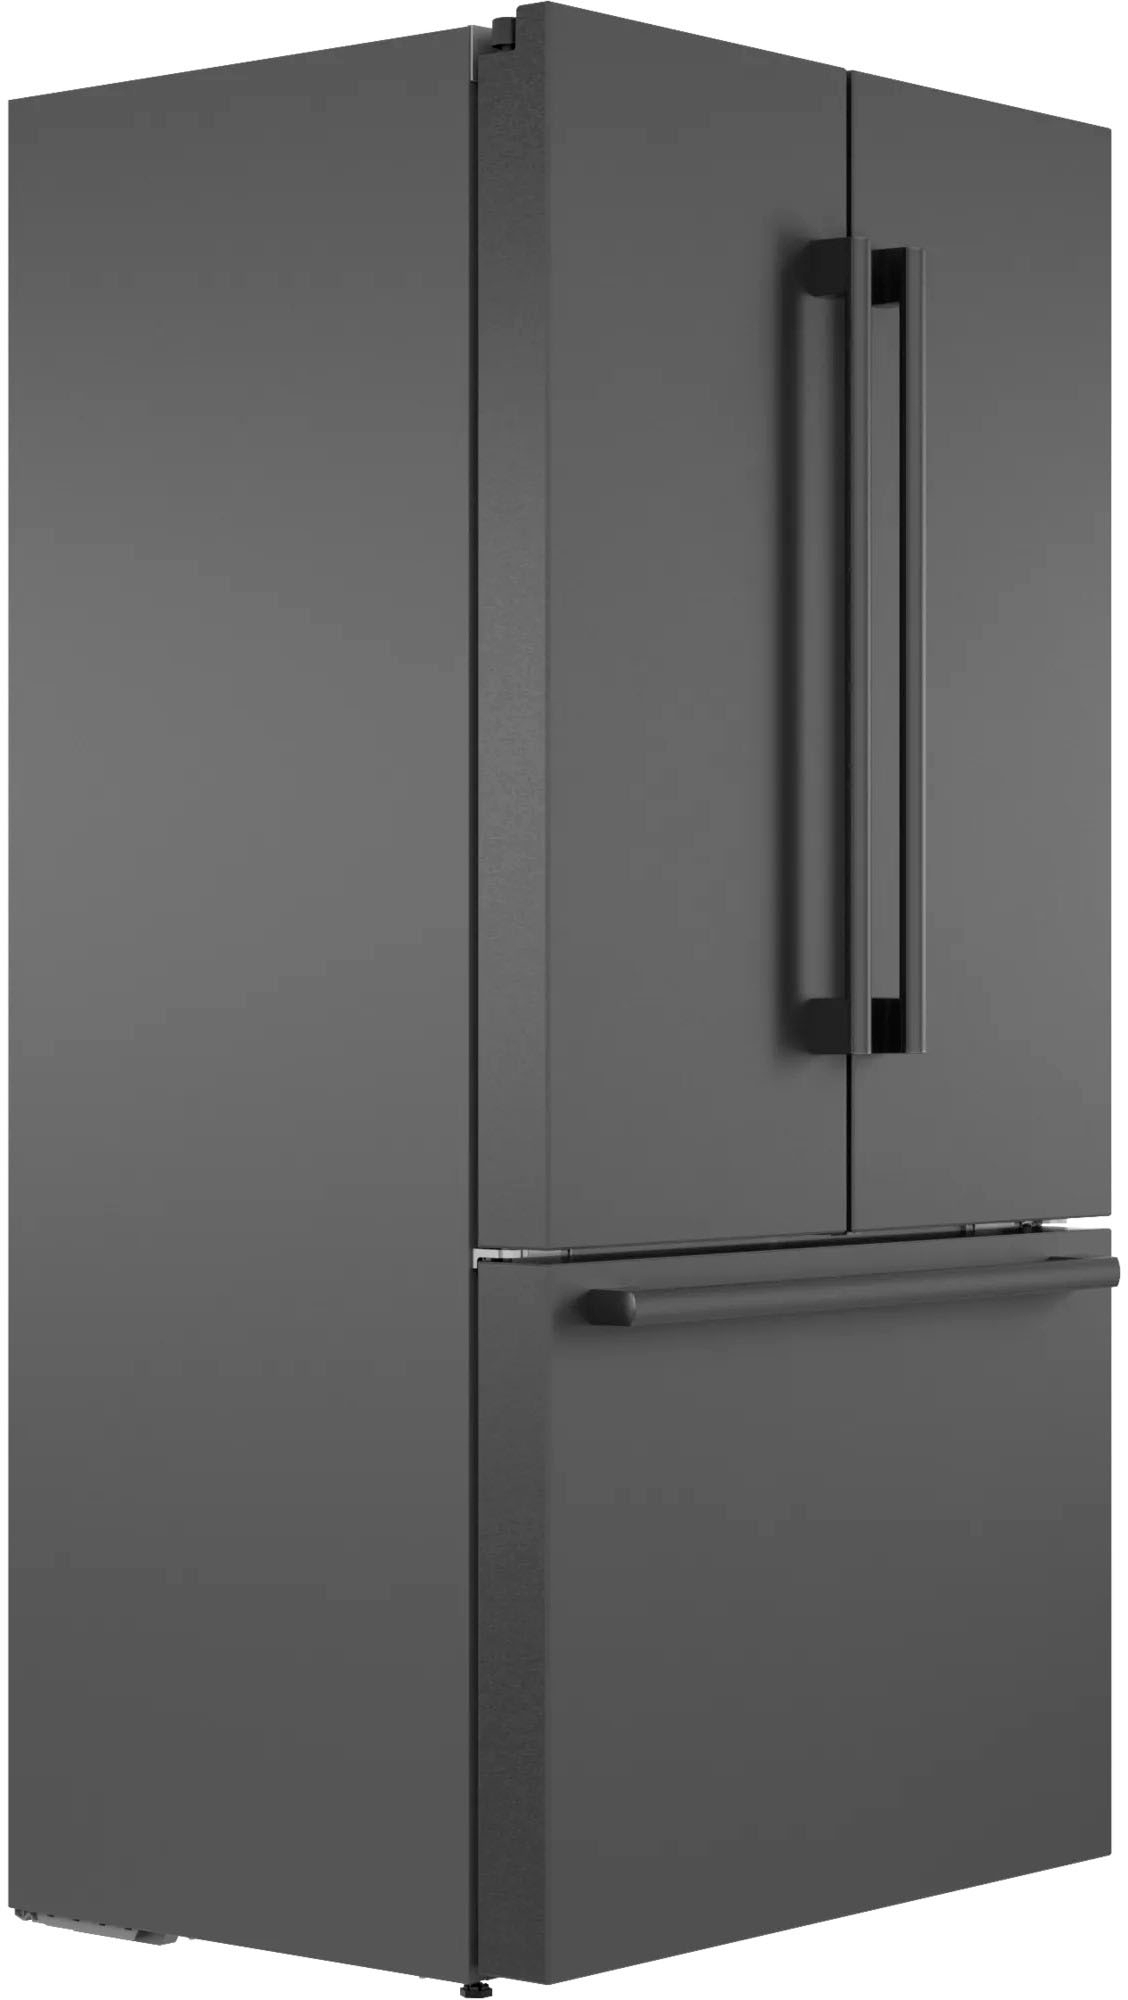 Angle View: Bosch - 800 Series 21 Cu. Ft. French Door Counter-Depth Smart Refrigerator - Black Stainless Steel